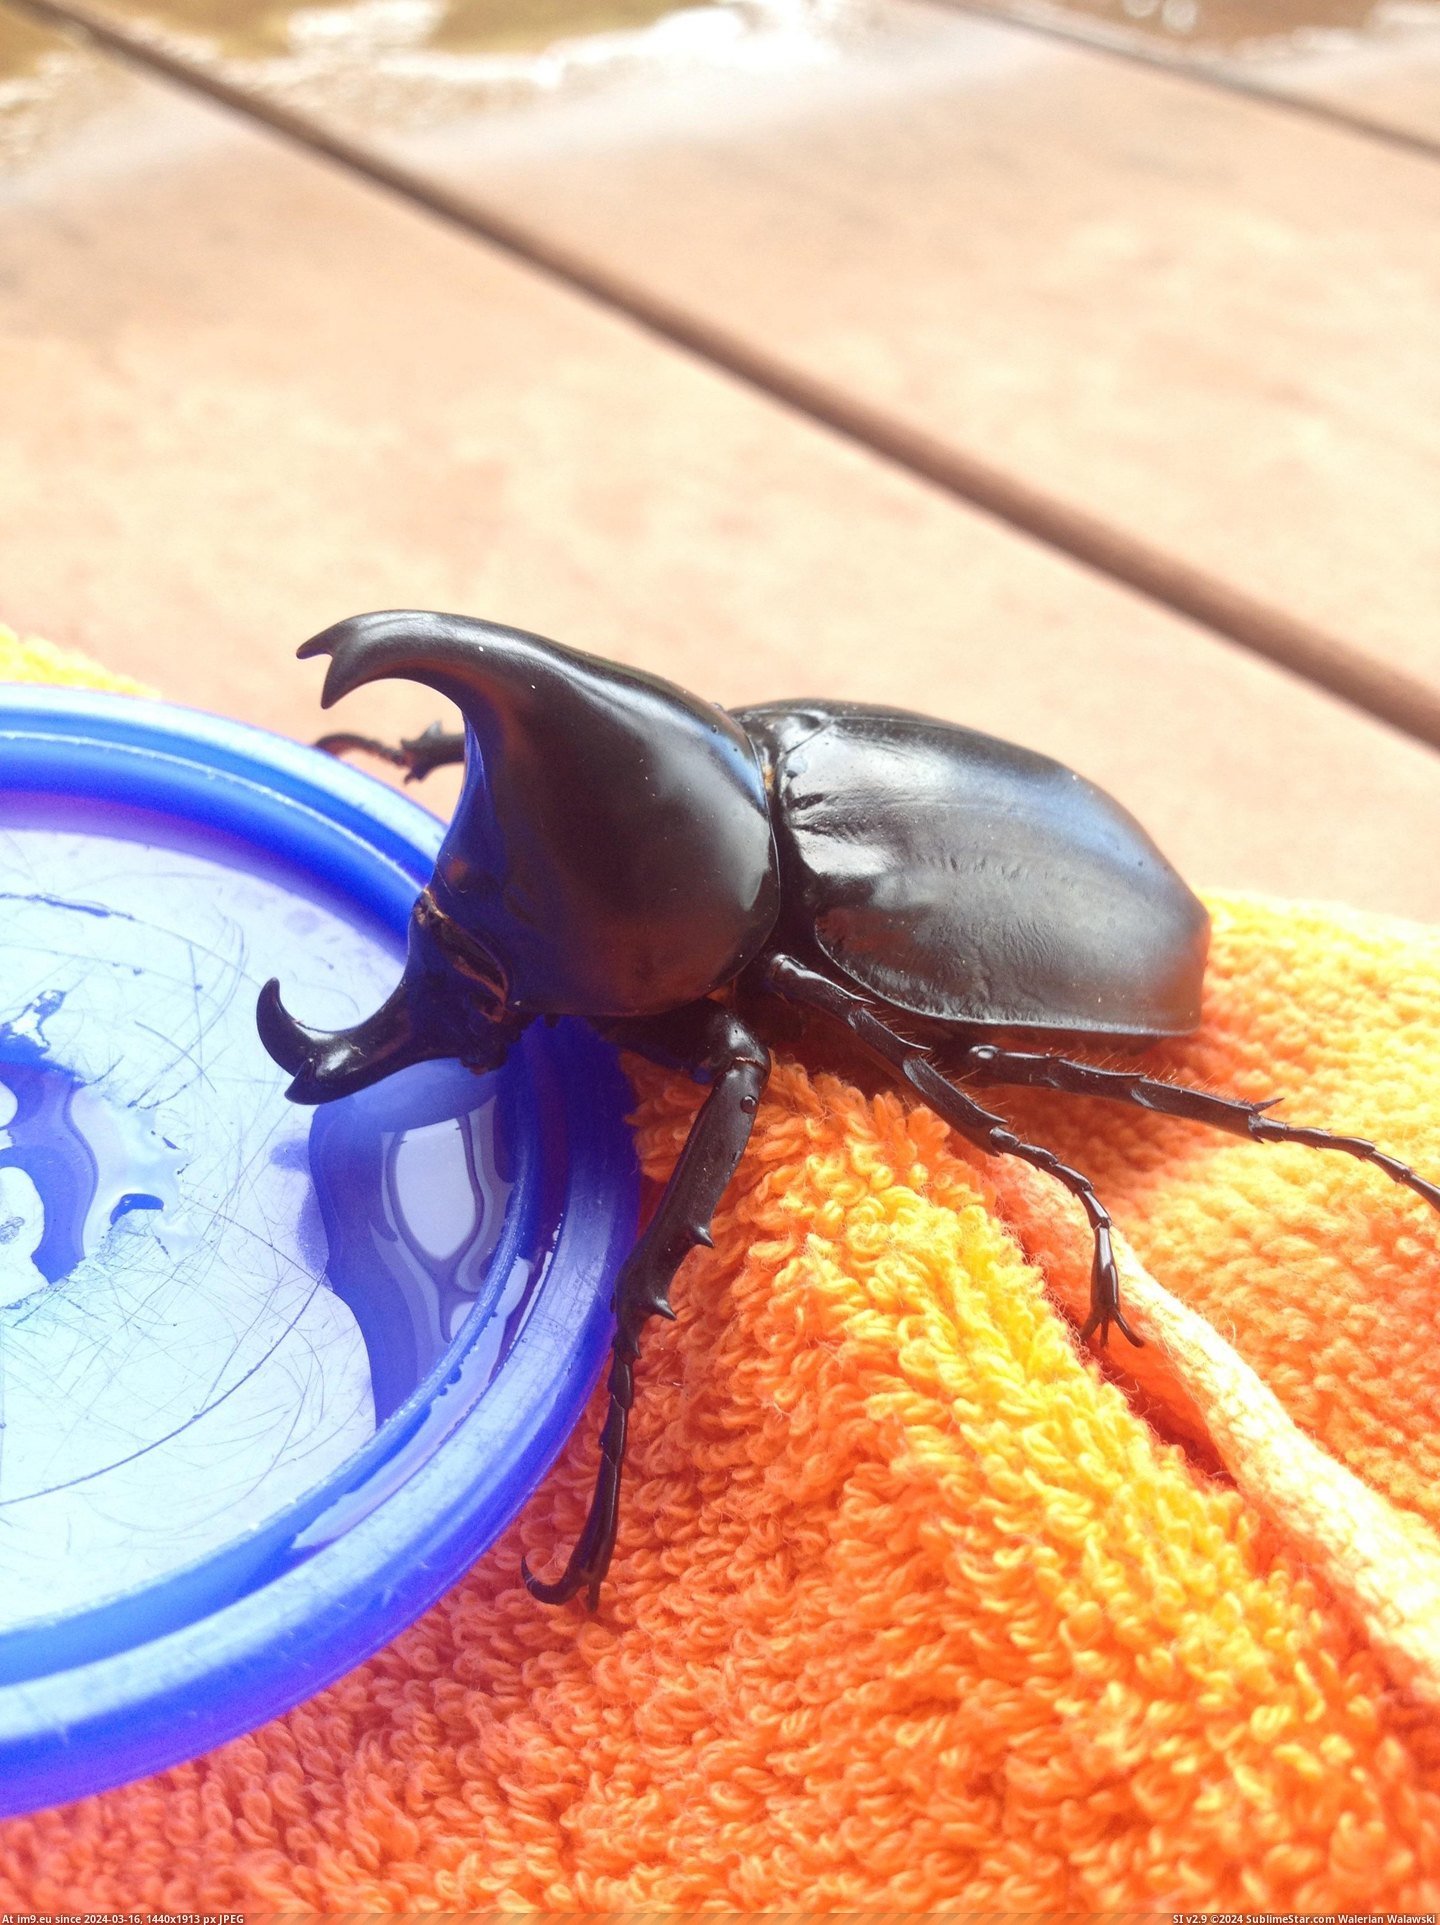 #Water #Live #Sugar #Beetle #Offering #Australia #Peace [Pics] I live in Australia. Today this beetle hissed at me so i got it some sugar water as a peace offering. Pic. (Изображение из альбом My r/PICS favs))